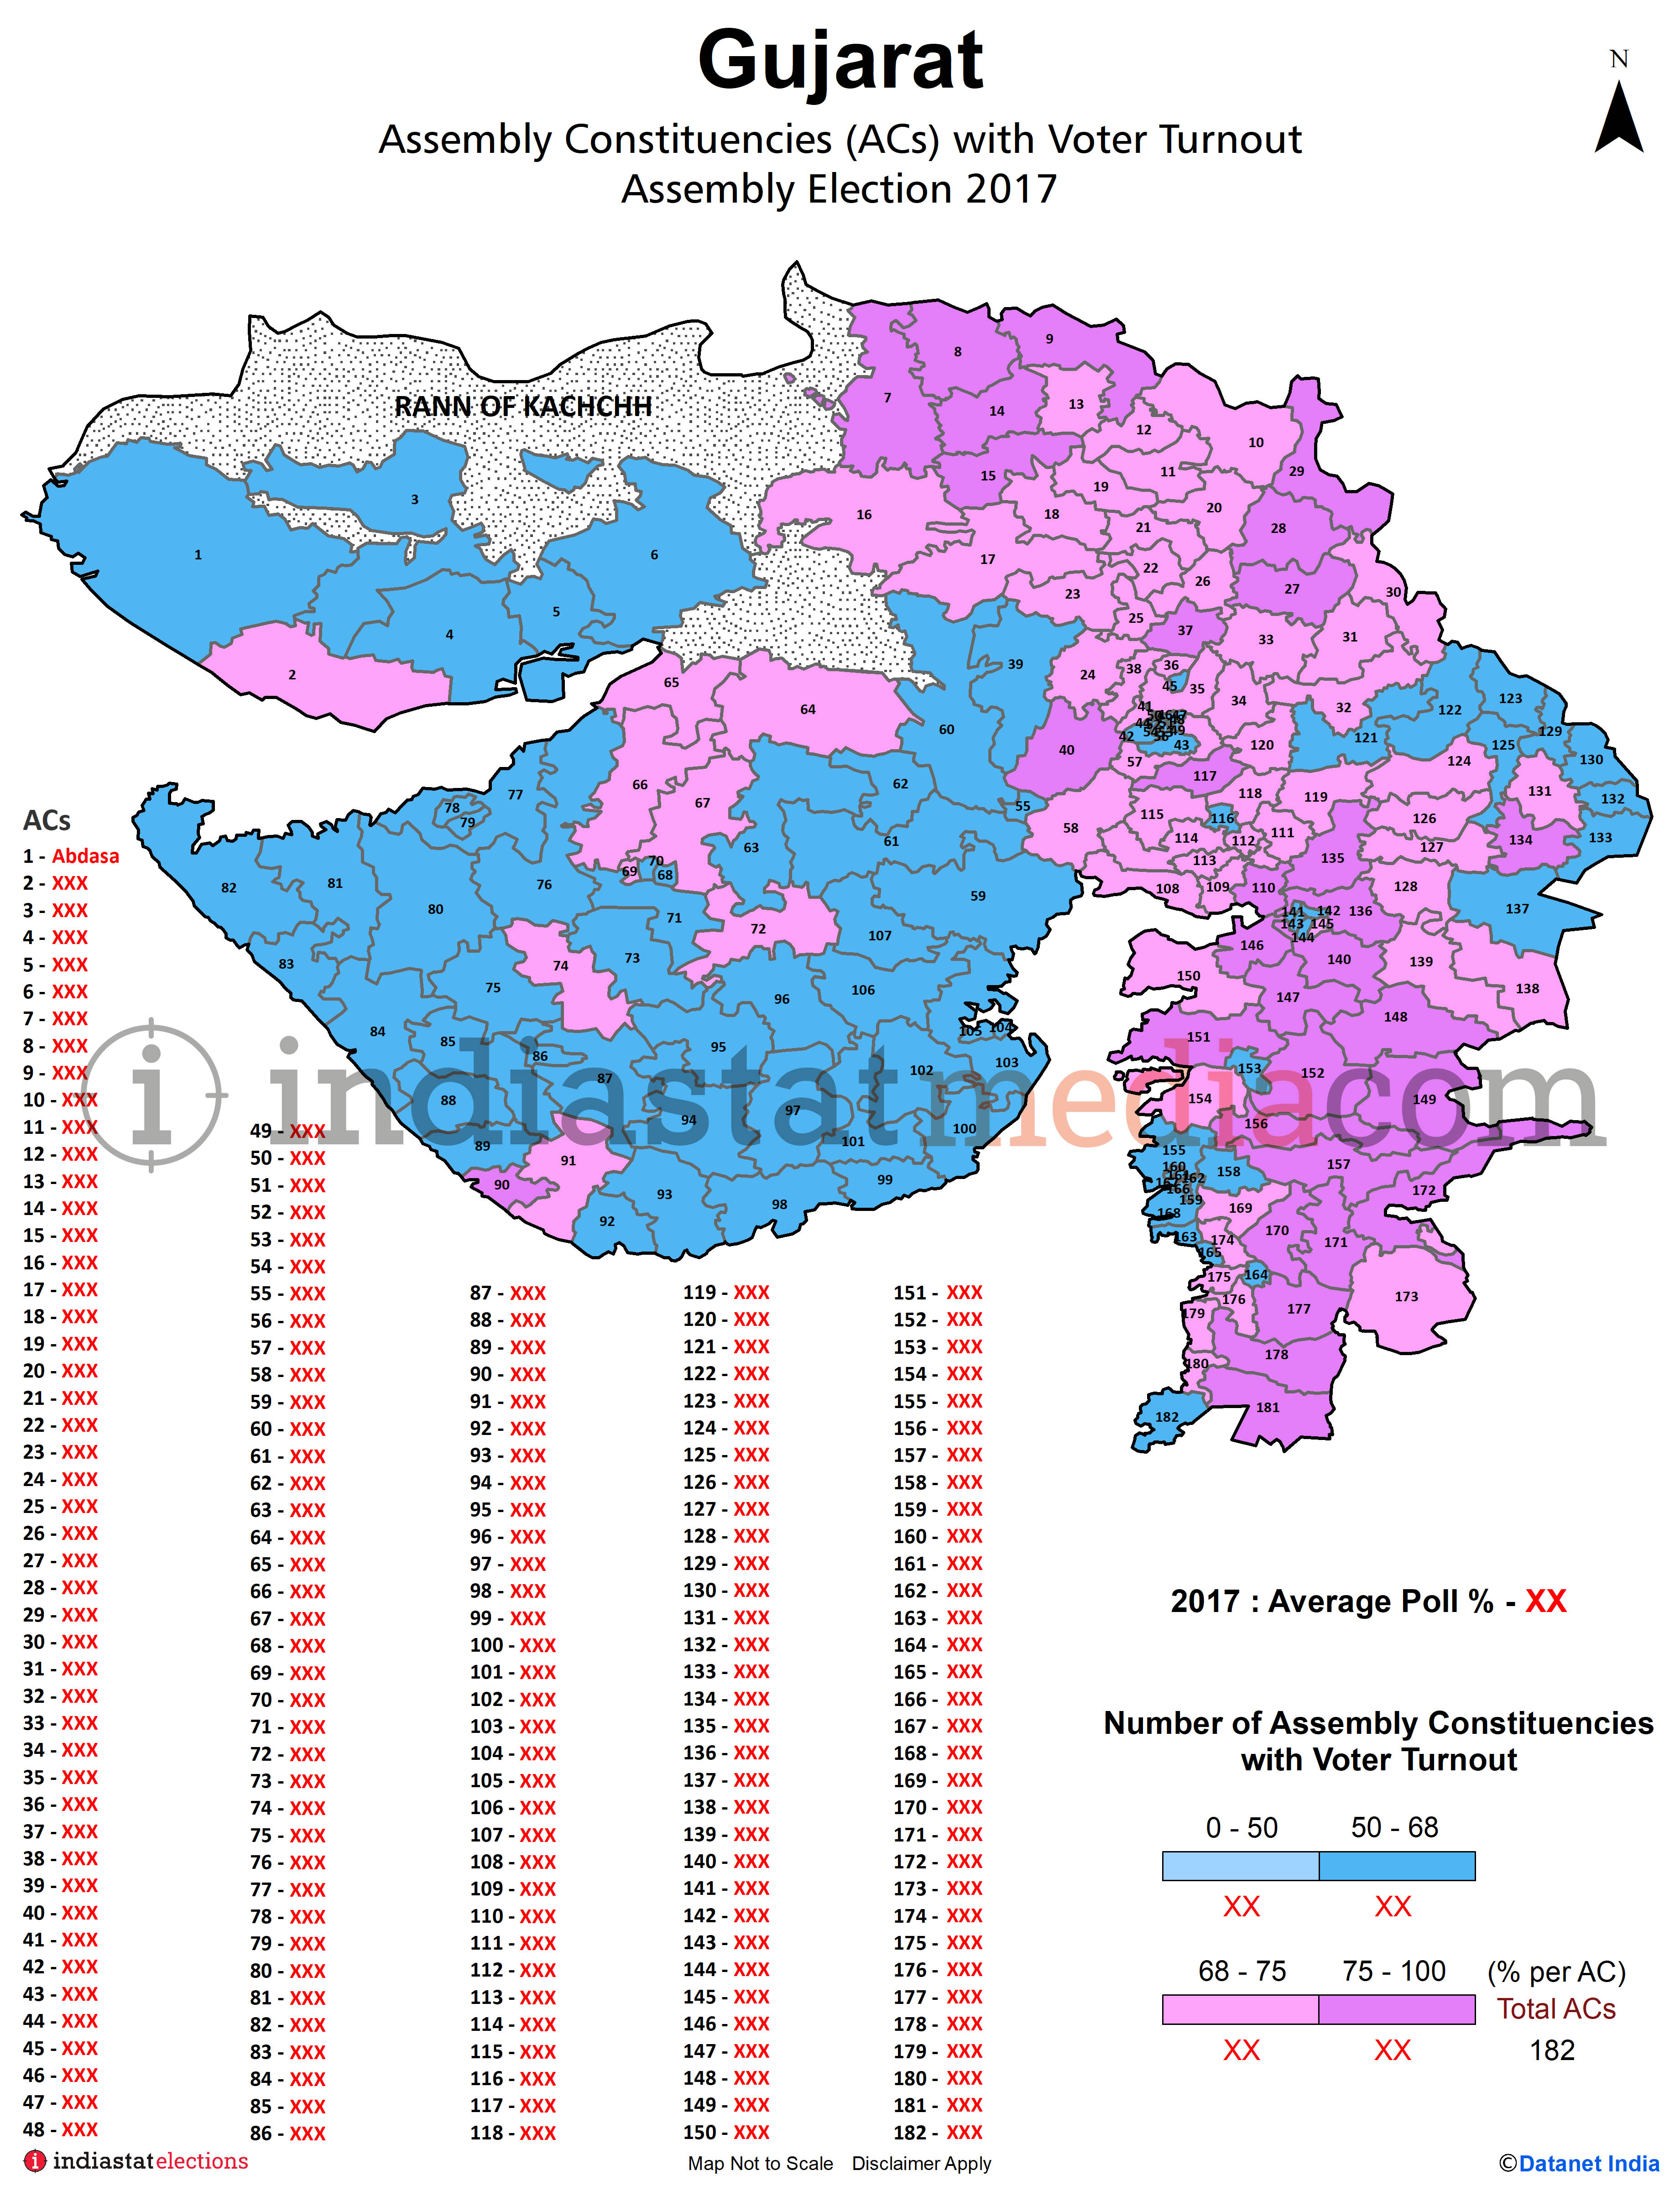 Assembly Constituencies (ACs) with Voter Turnout in Gujarat (Assembly Election - 2017)